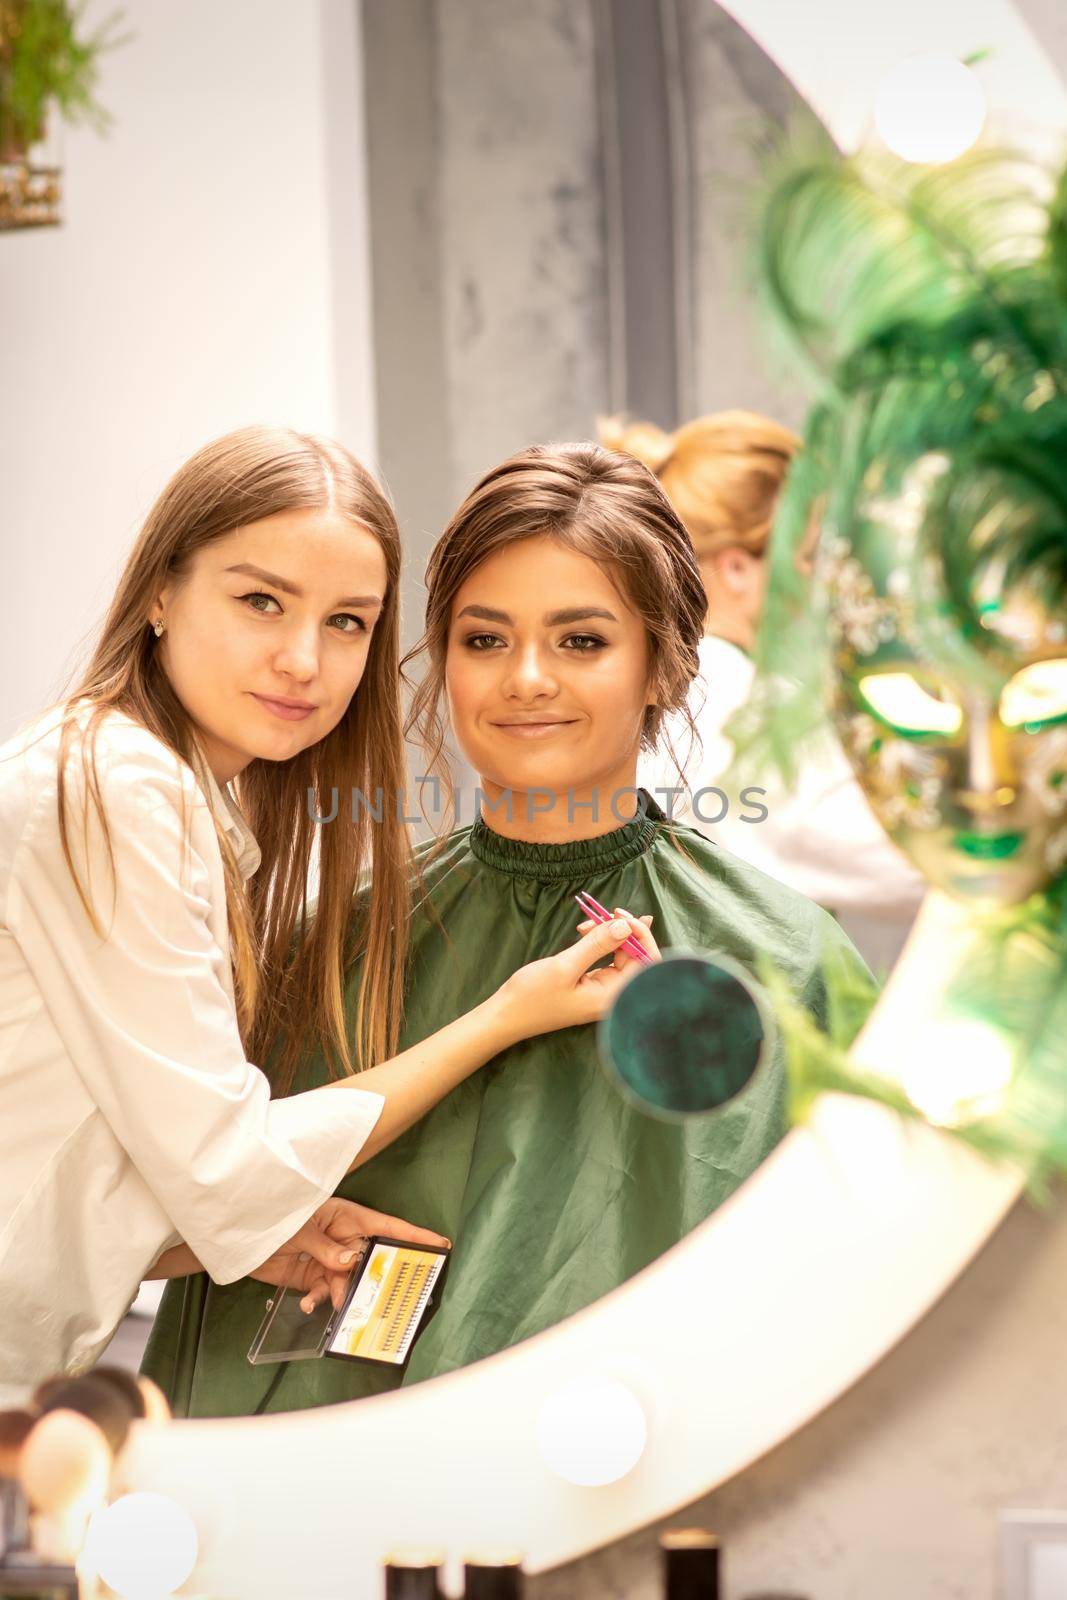 Professional make up artist and beautiful girl looking in the mirror smiling in a beauty salon